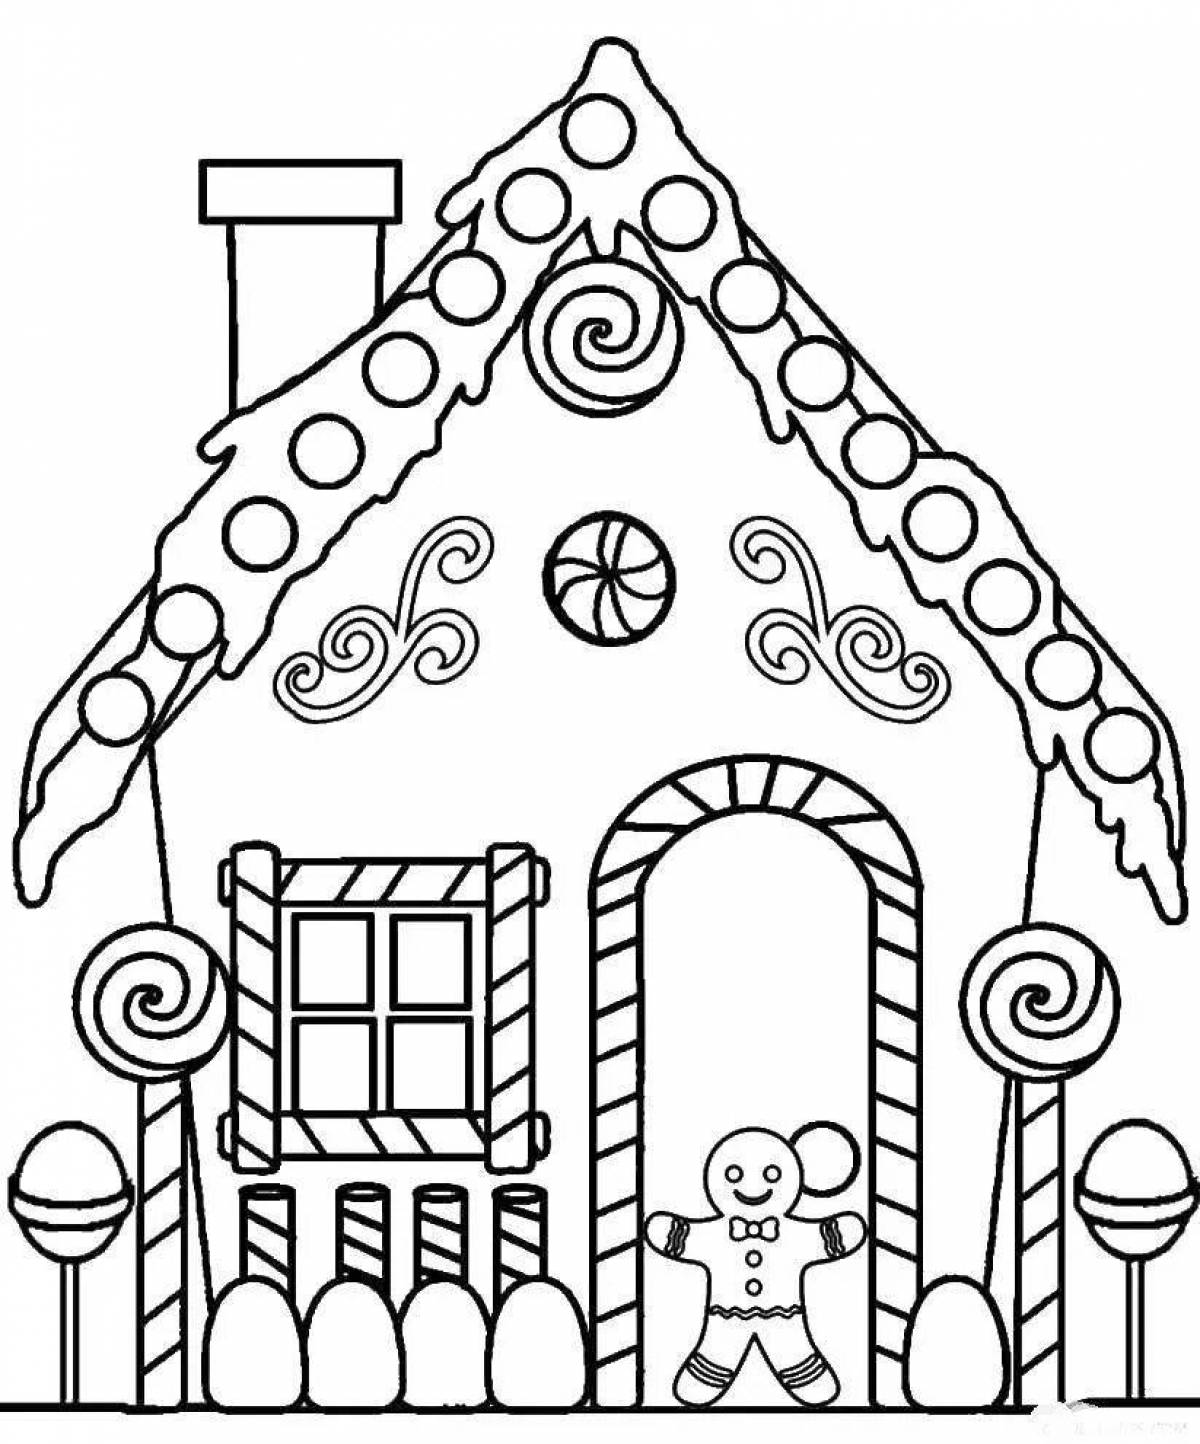 Sweet gingerbread house coloring book for kids